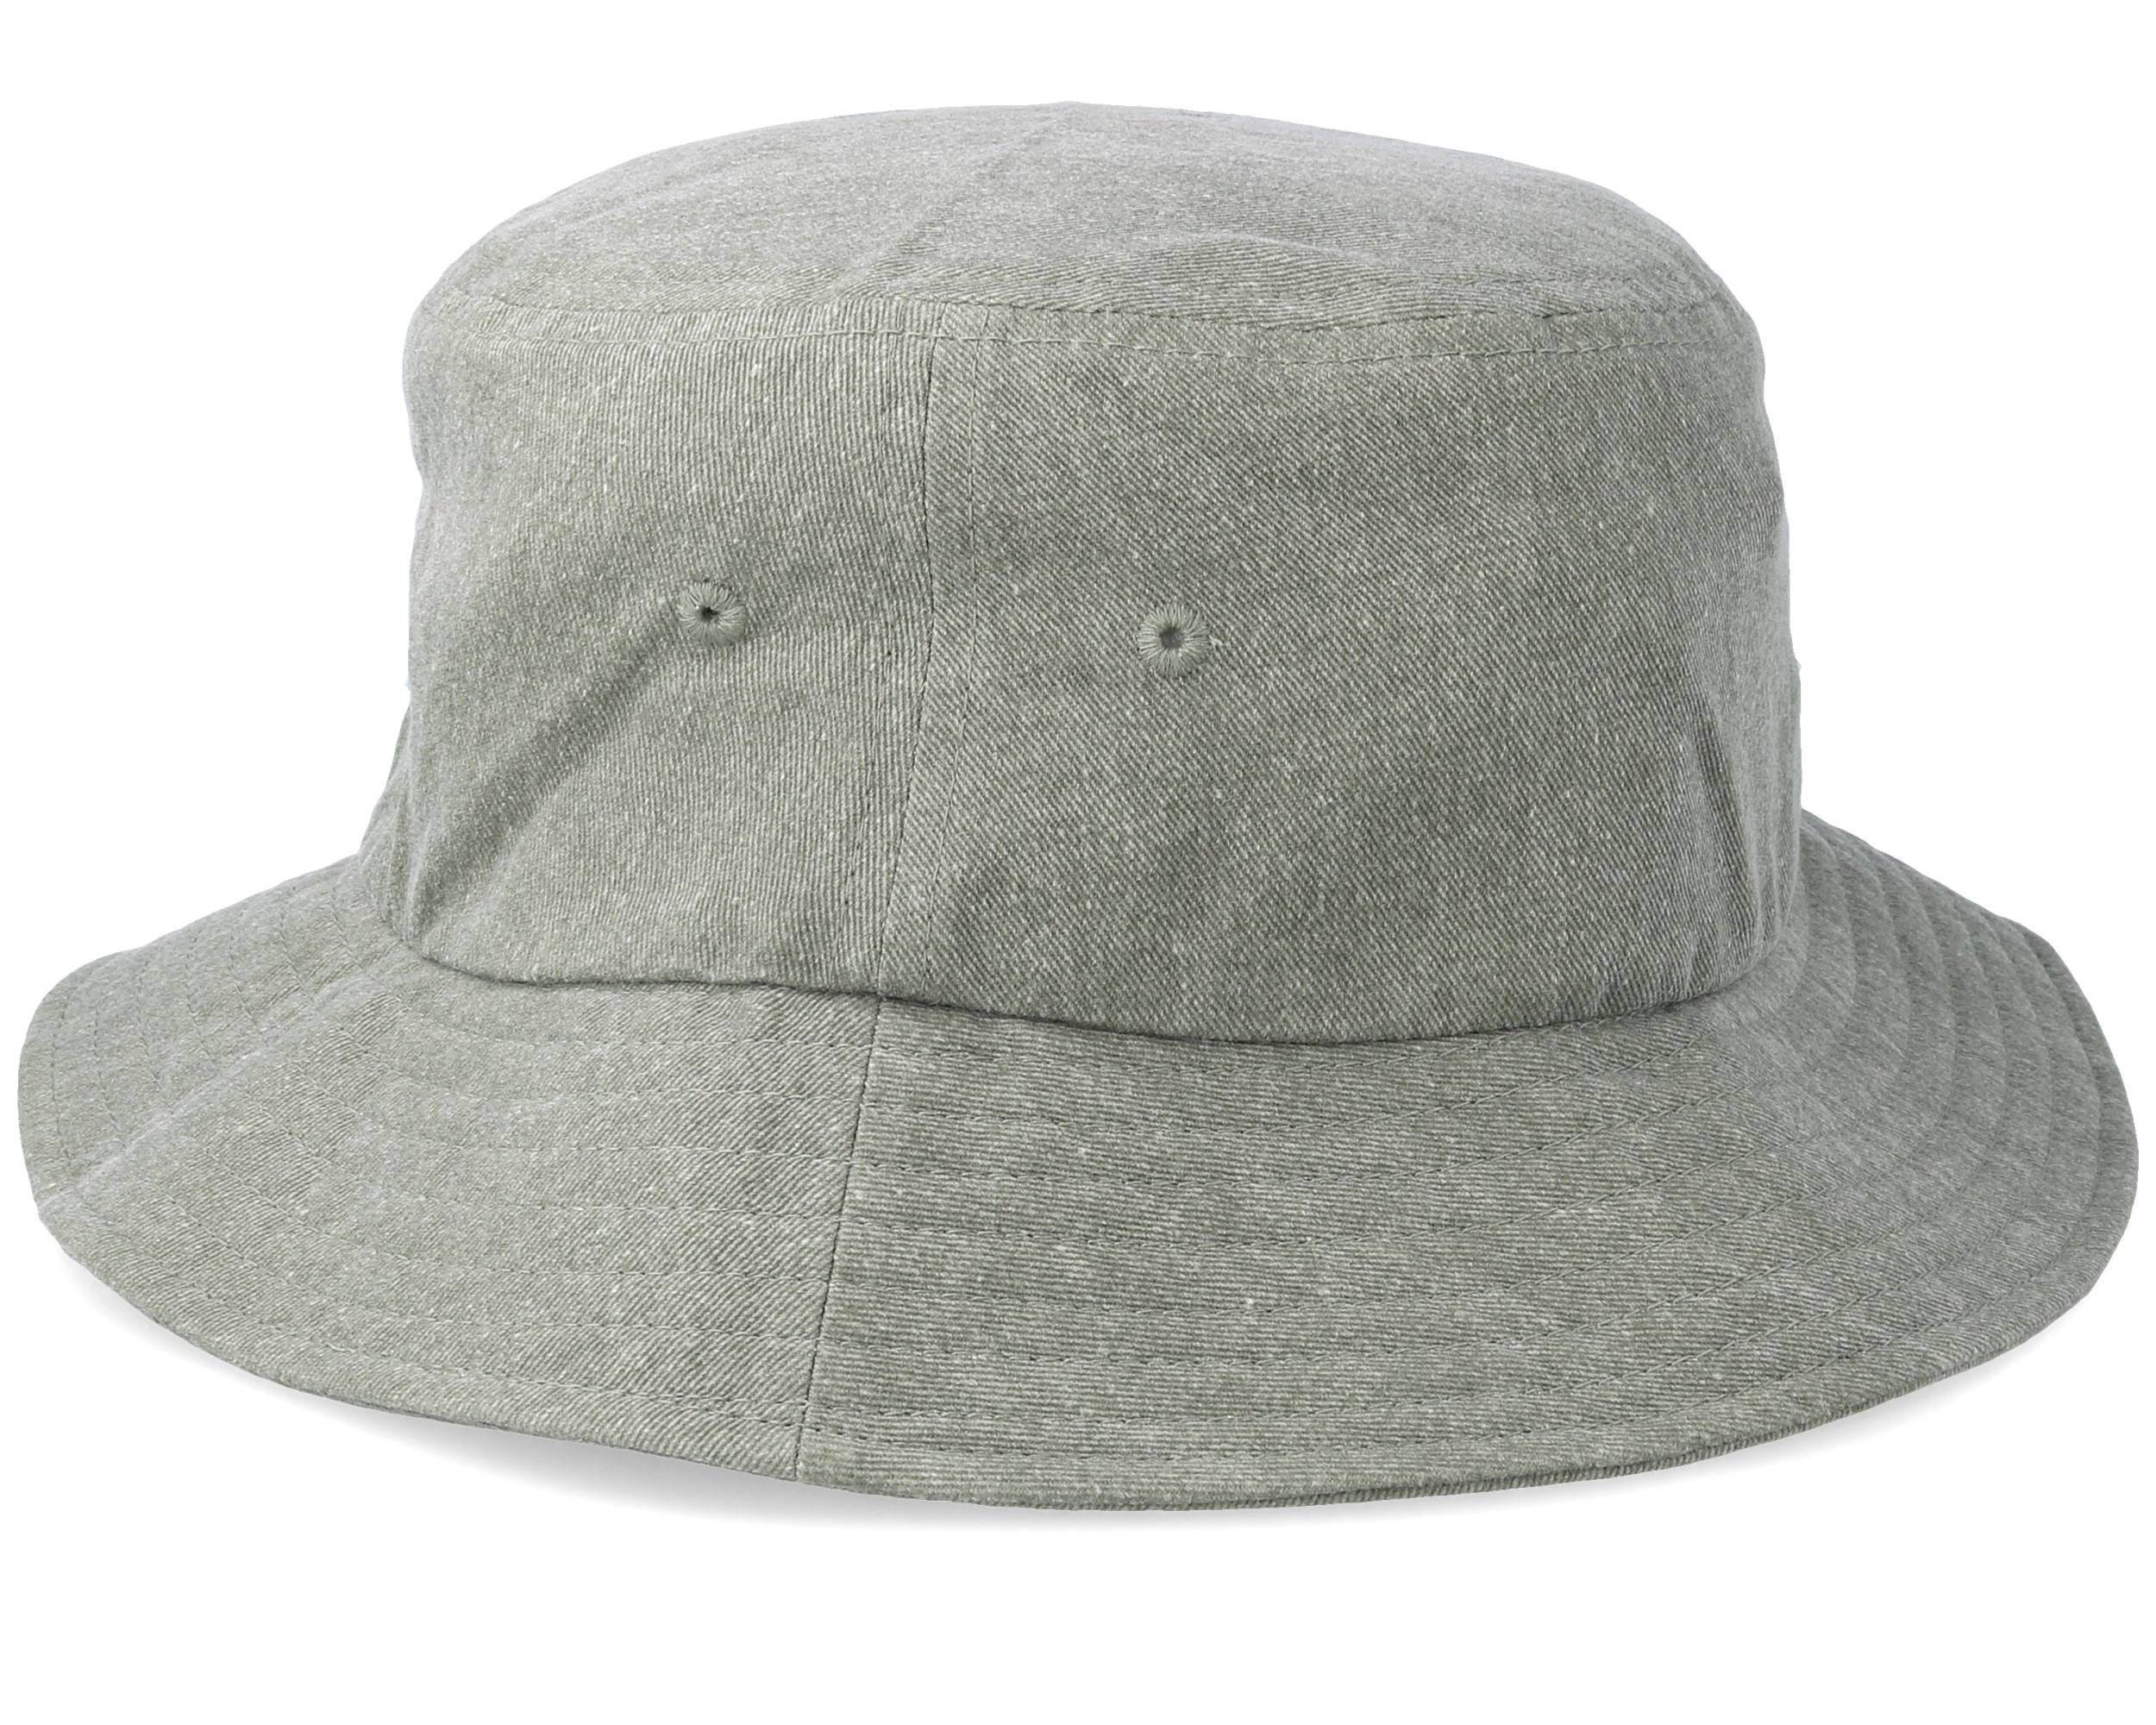 Lighthouse Military Green Bucket - Rip Curl hats | Hatstore.co.uk